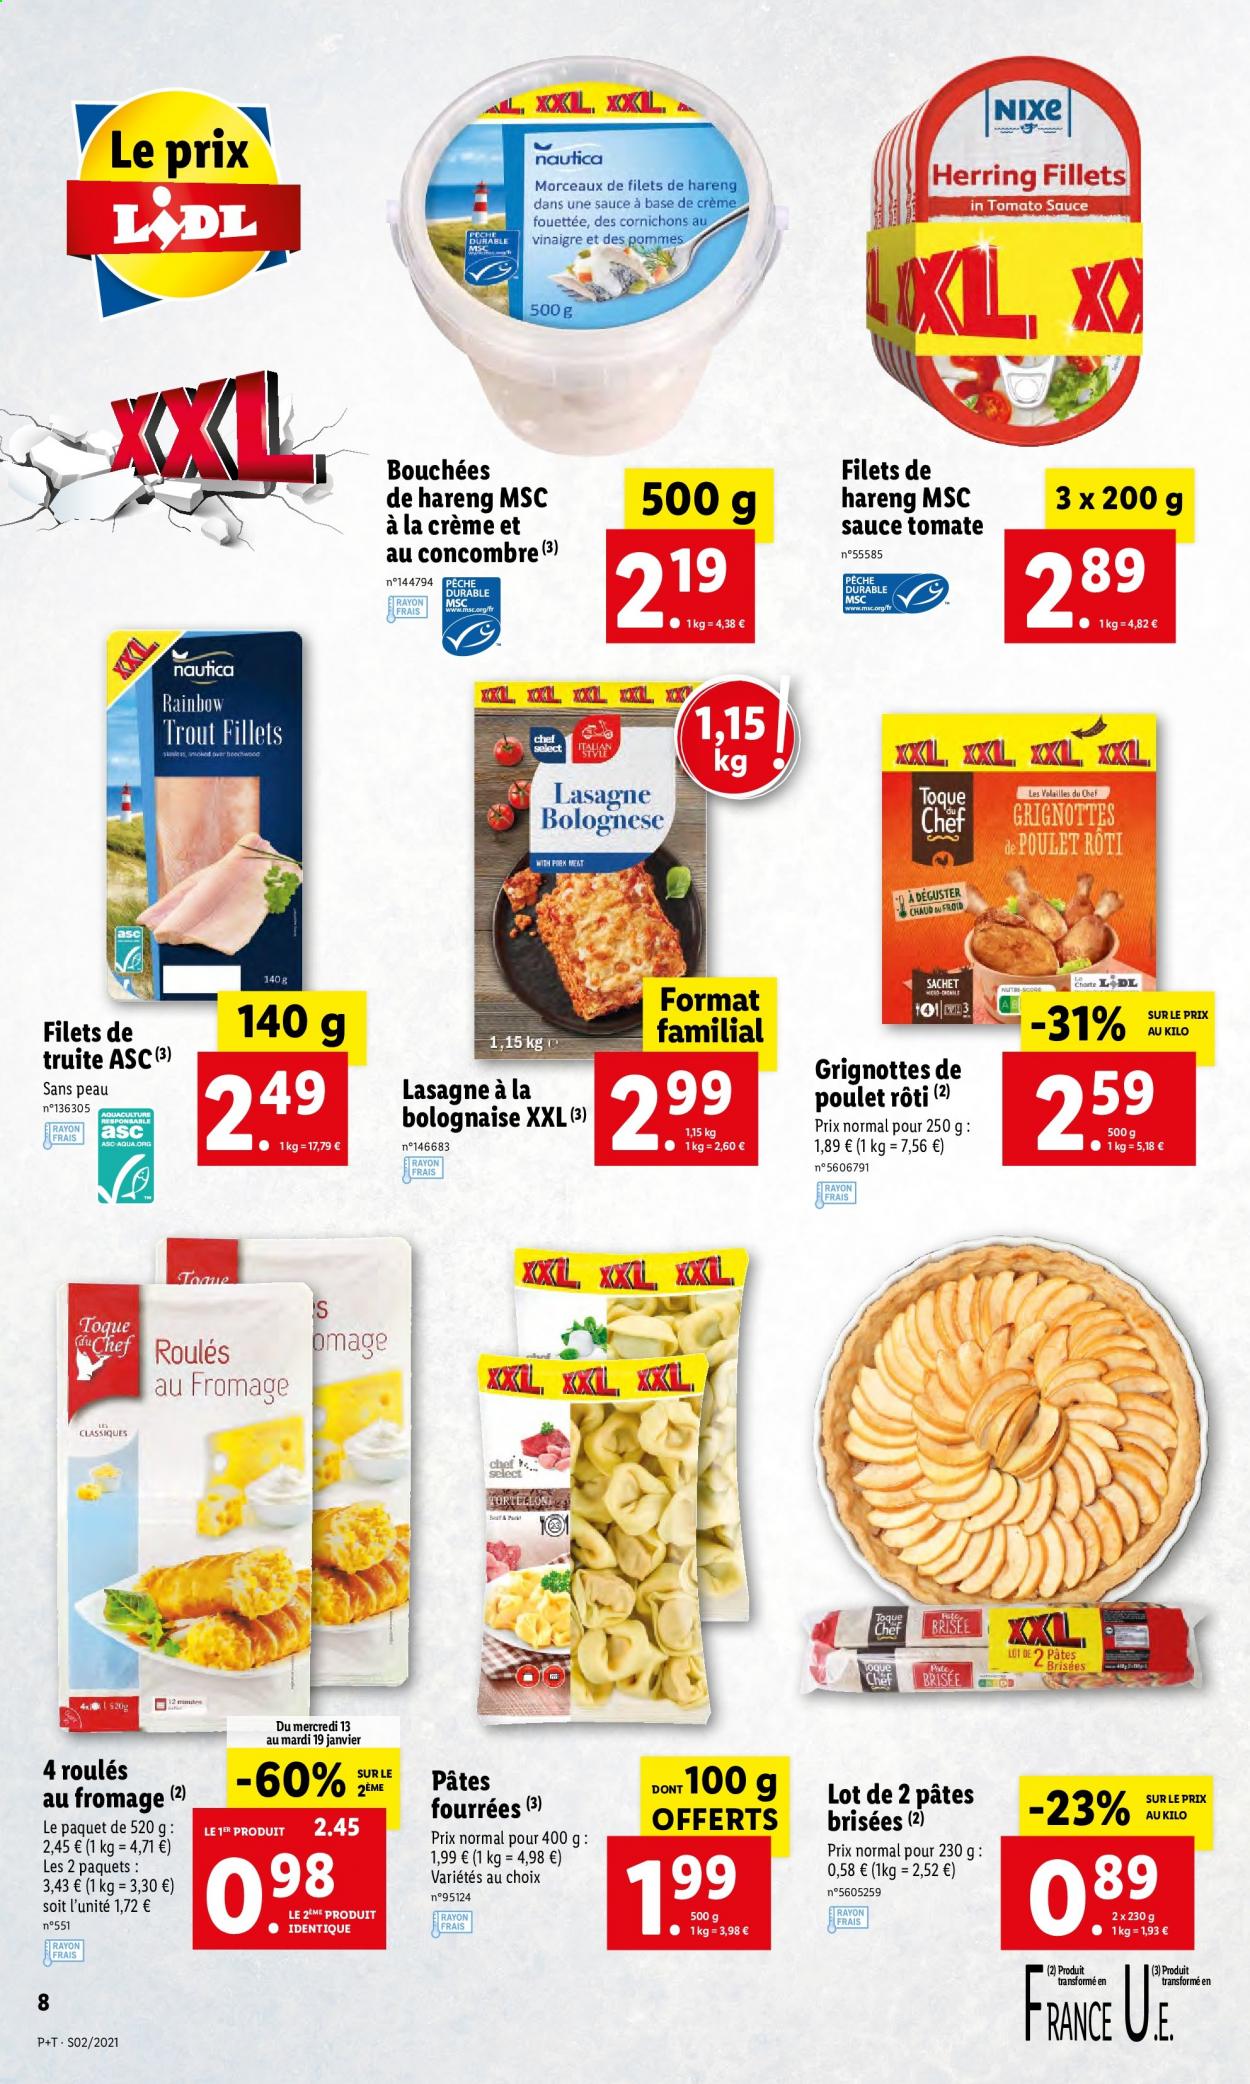 Catalogue Lidl - 13.01.2021 - 19.01.2021. Page 8.